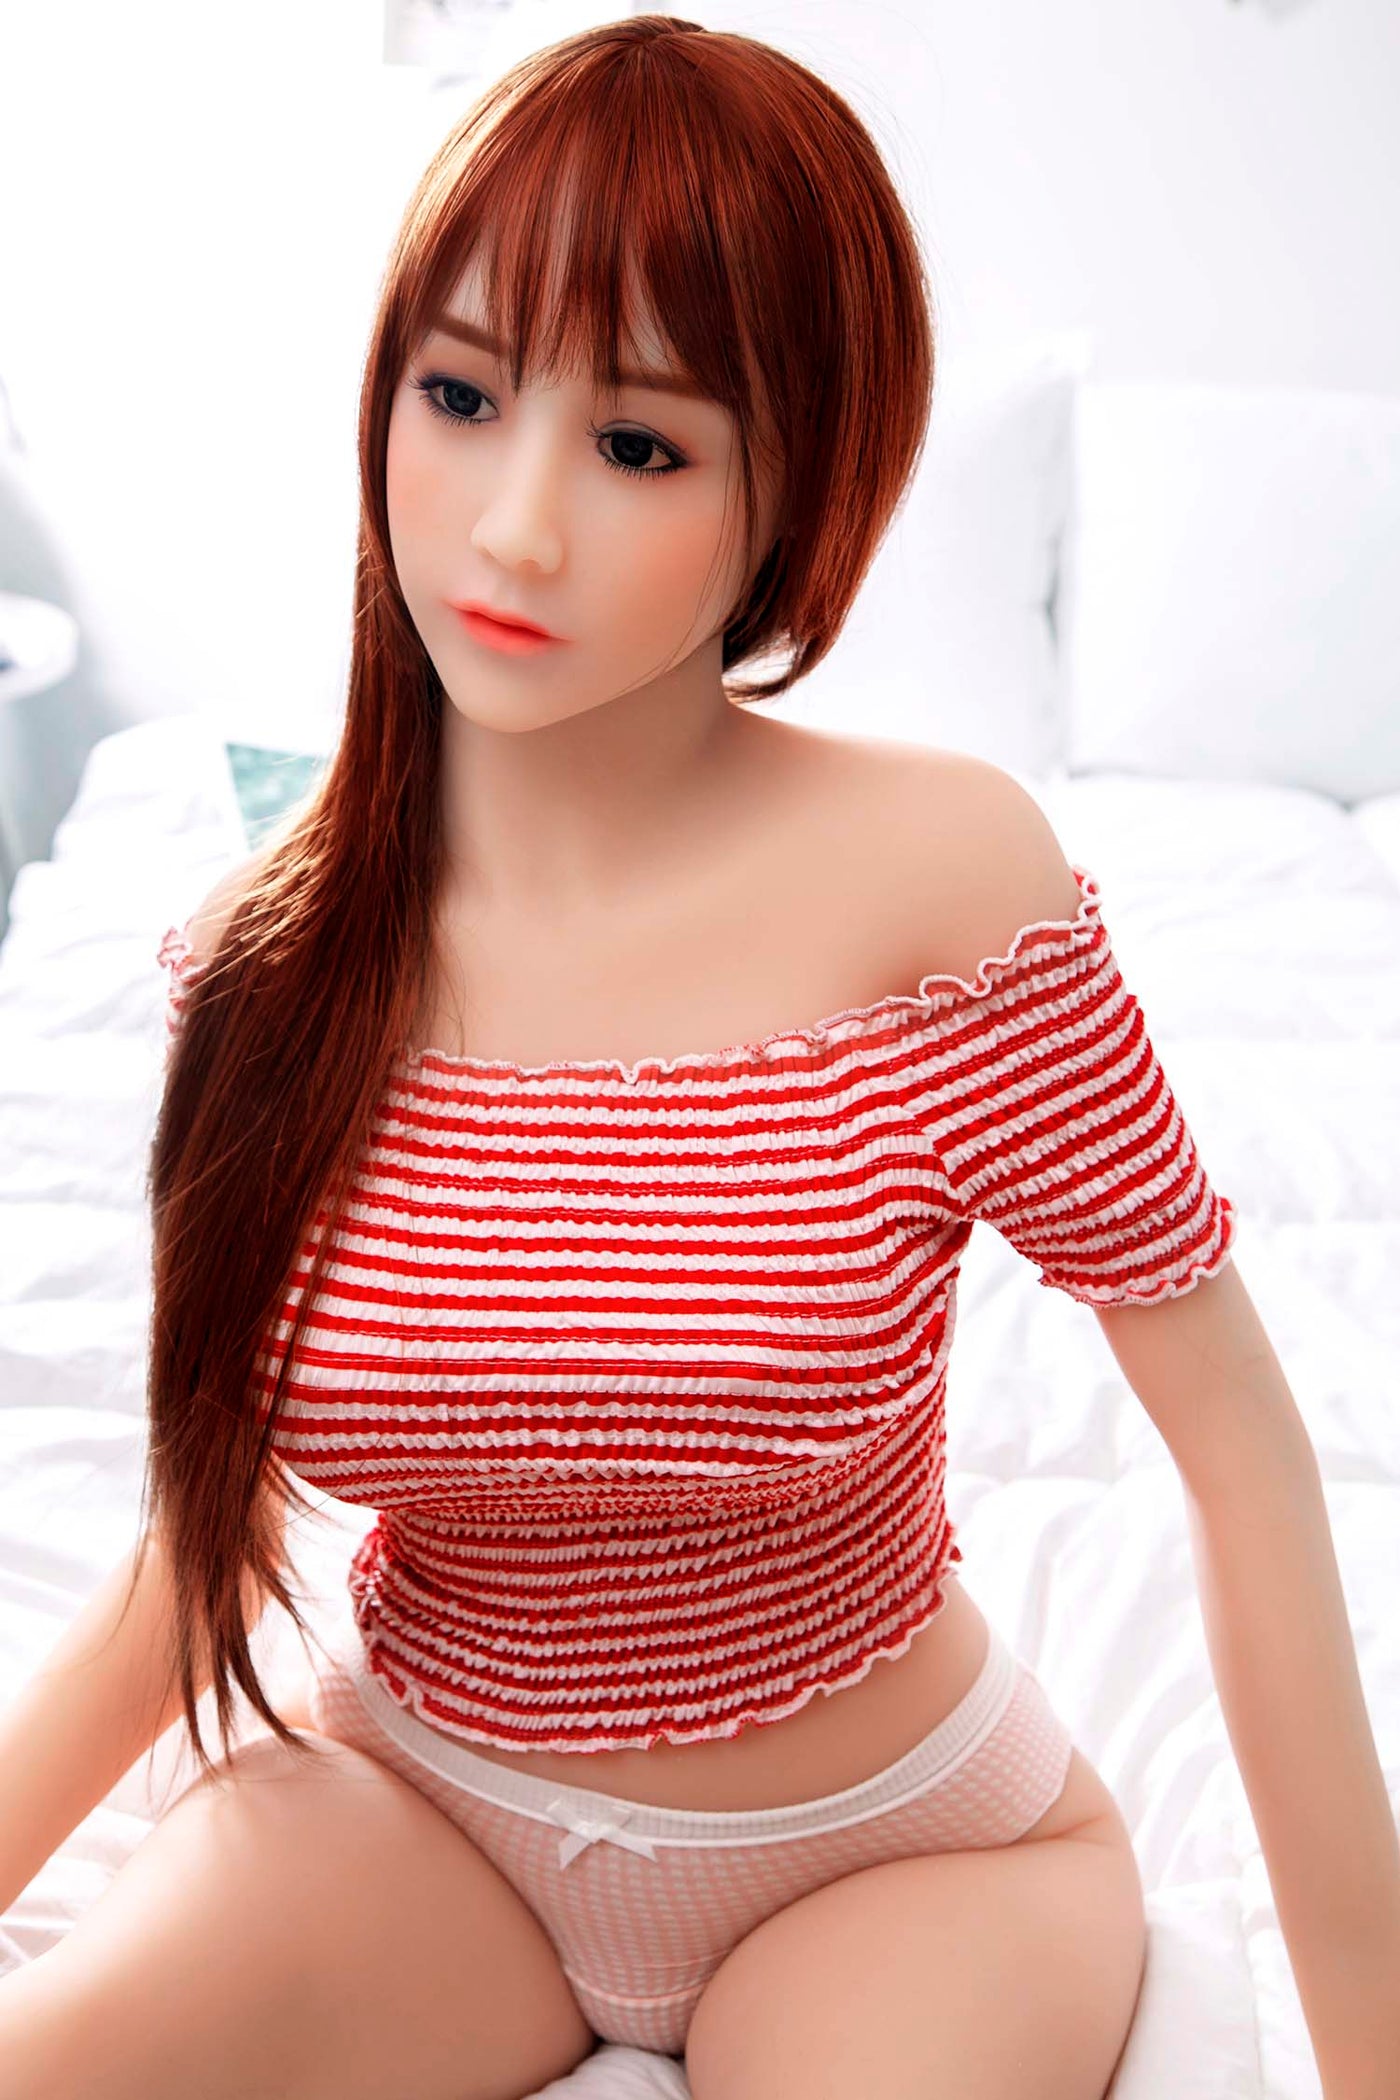 Fire Doll - Amia - Realistic Sex Doll - 165cm - Natural